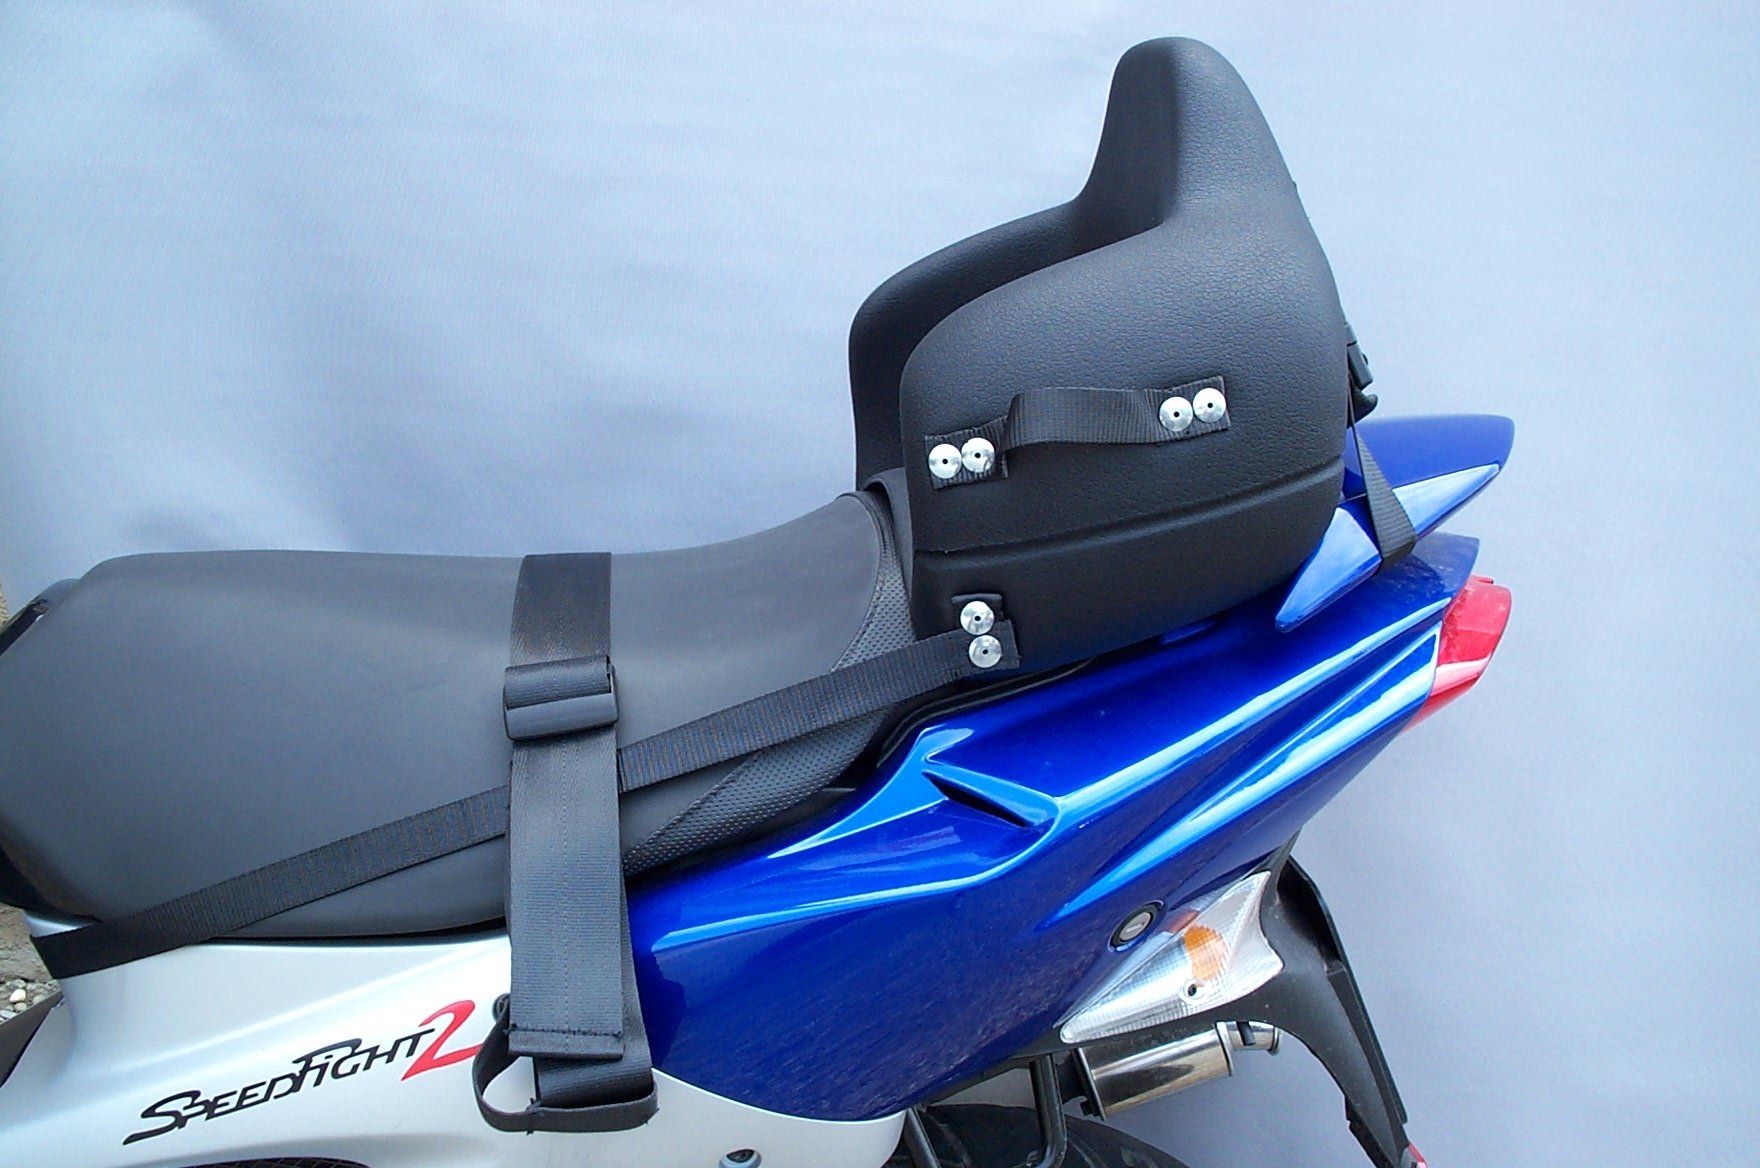 Stamatakis child seat for standard scooter